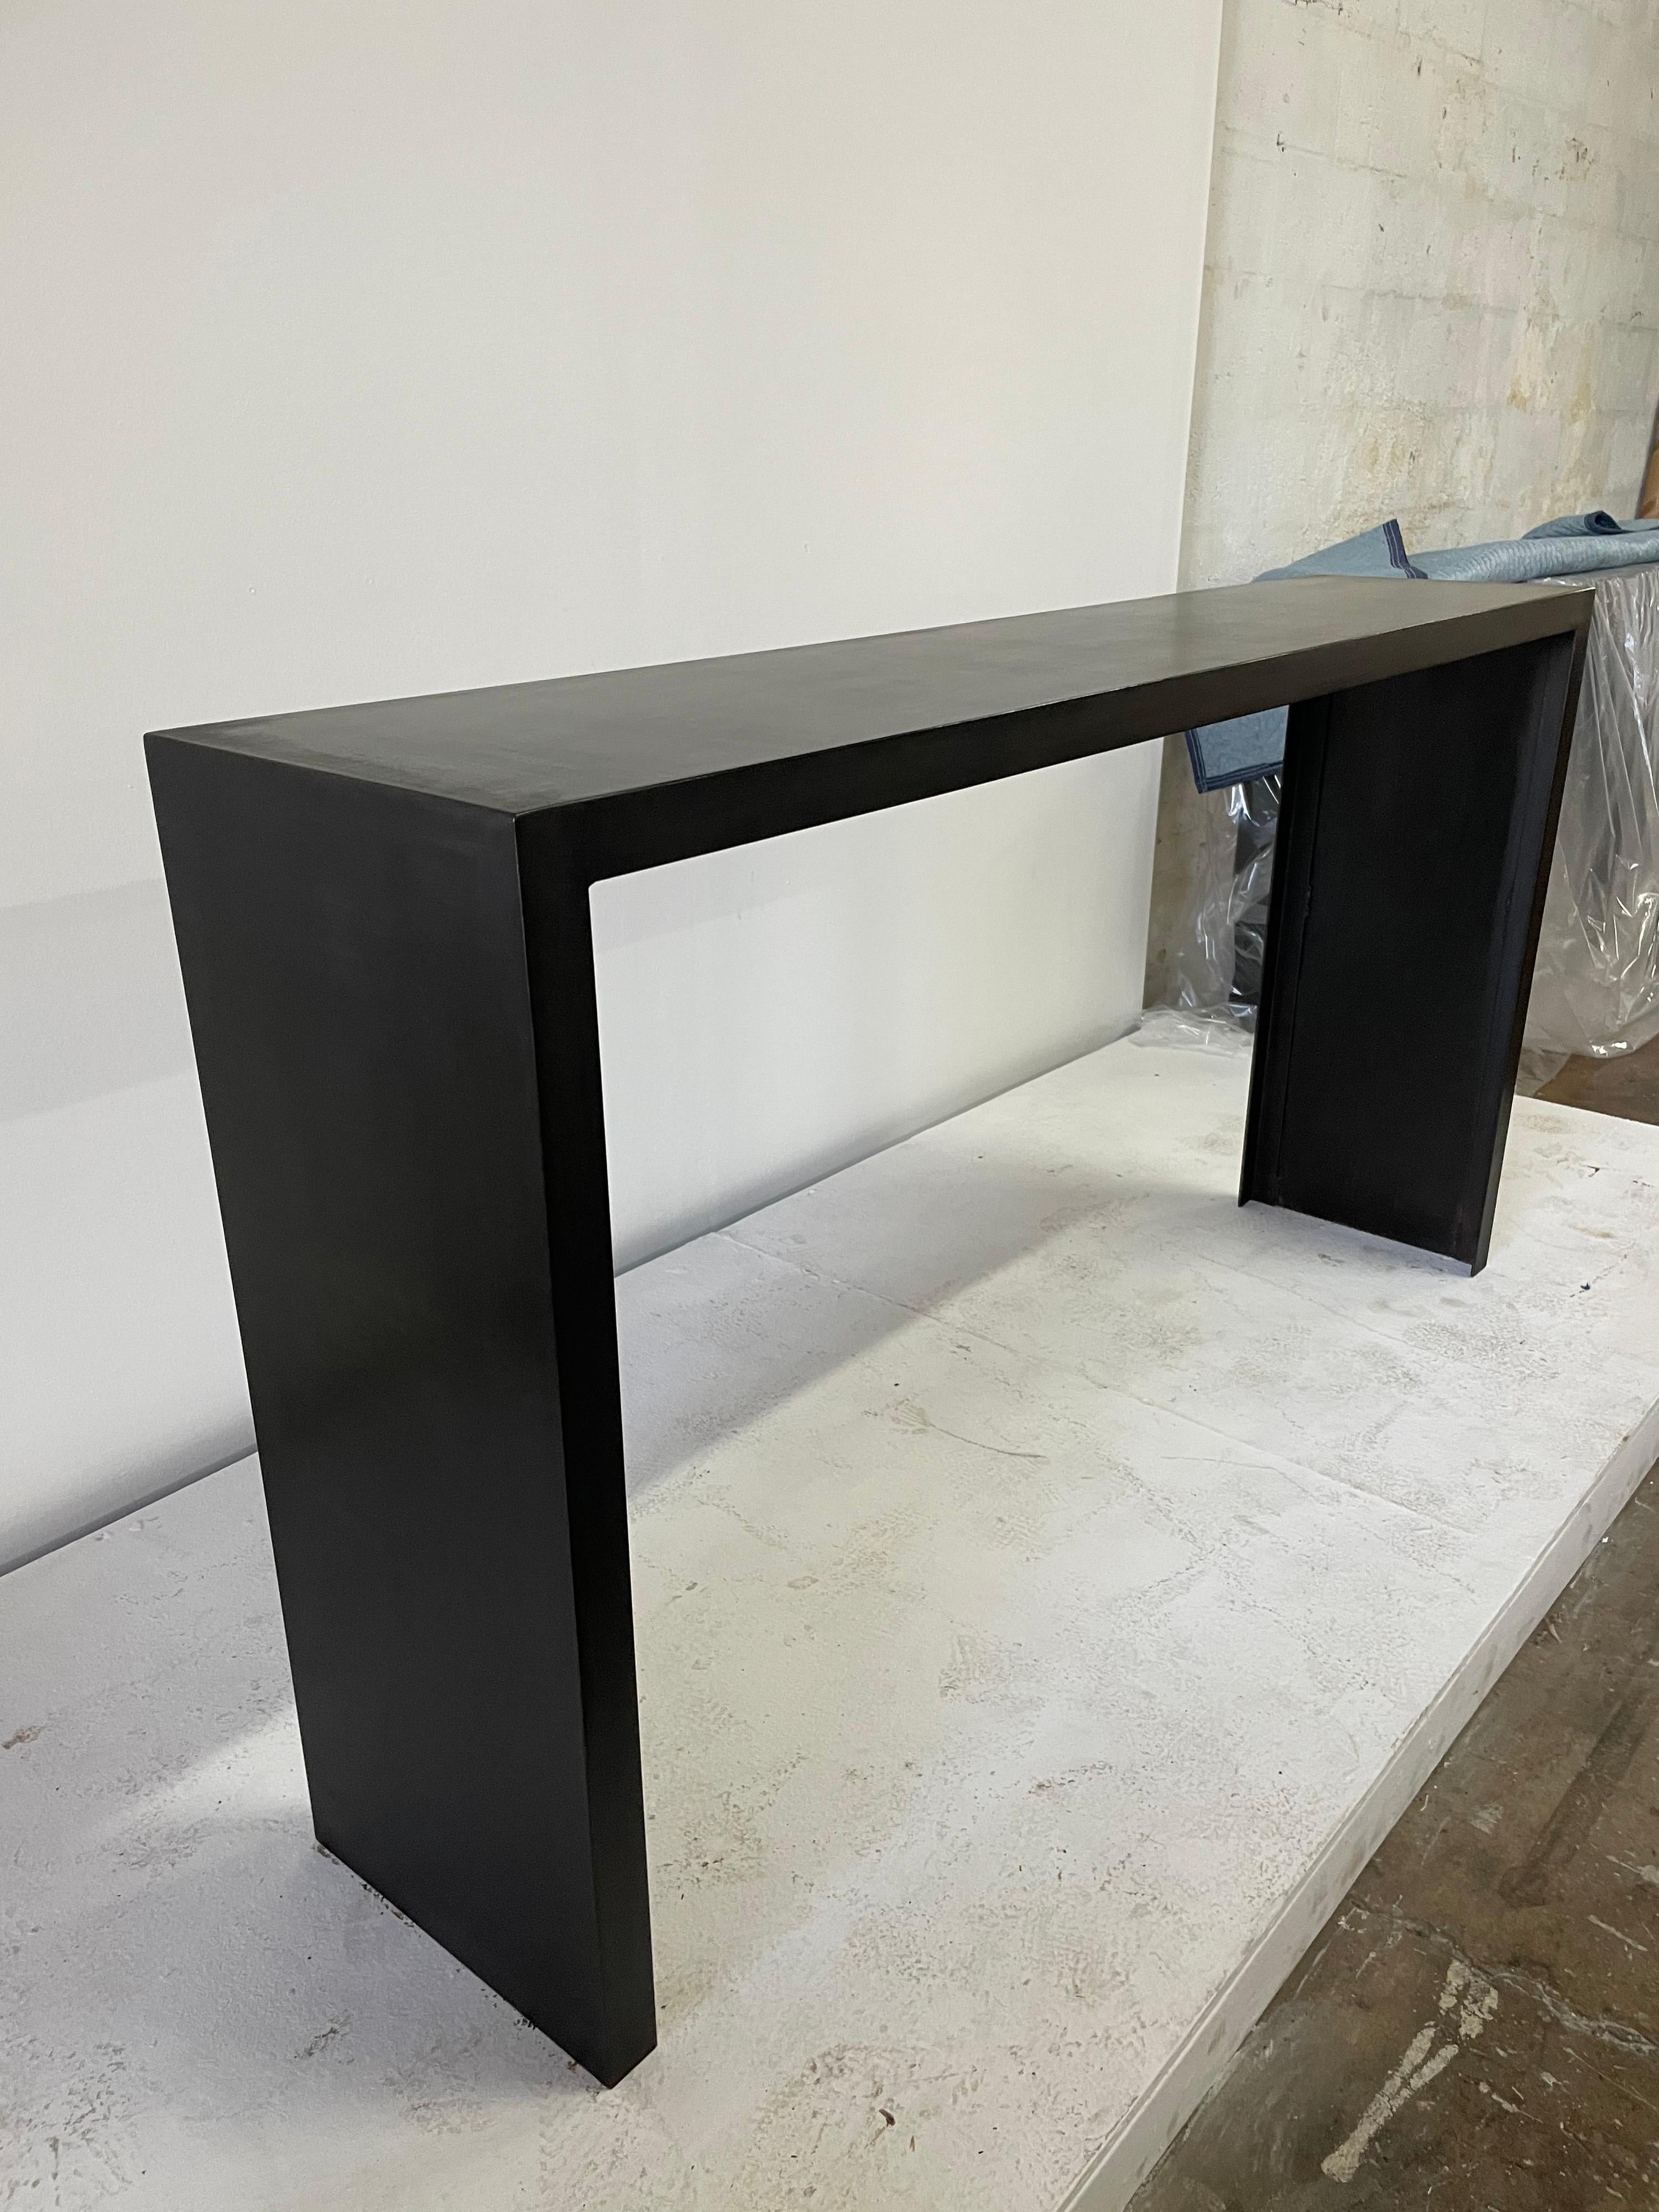 66 inch long Classic JMF style heavy iron console table. Showing Industrial metal signs and spots with matte dark wax finish. Not a perfect consistent finish which is how it was created and meant to be. Made and designed for Gustavo Olivieri Studio.